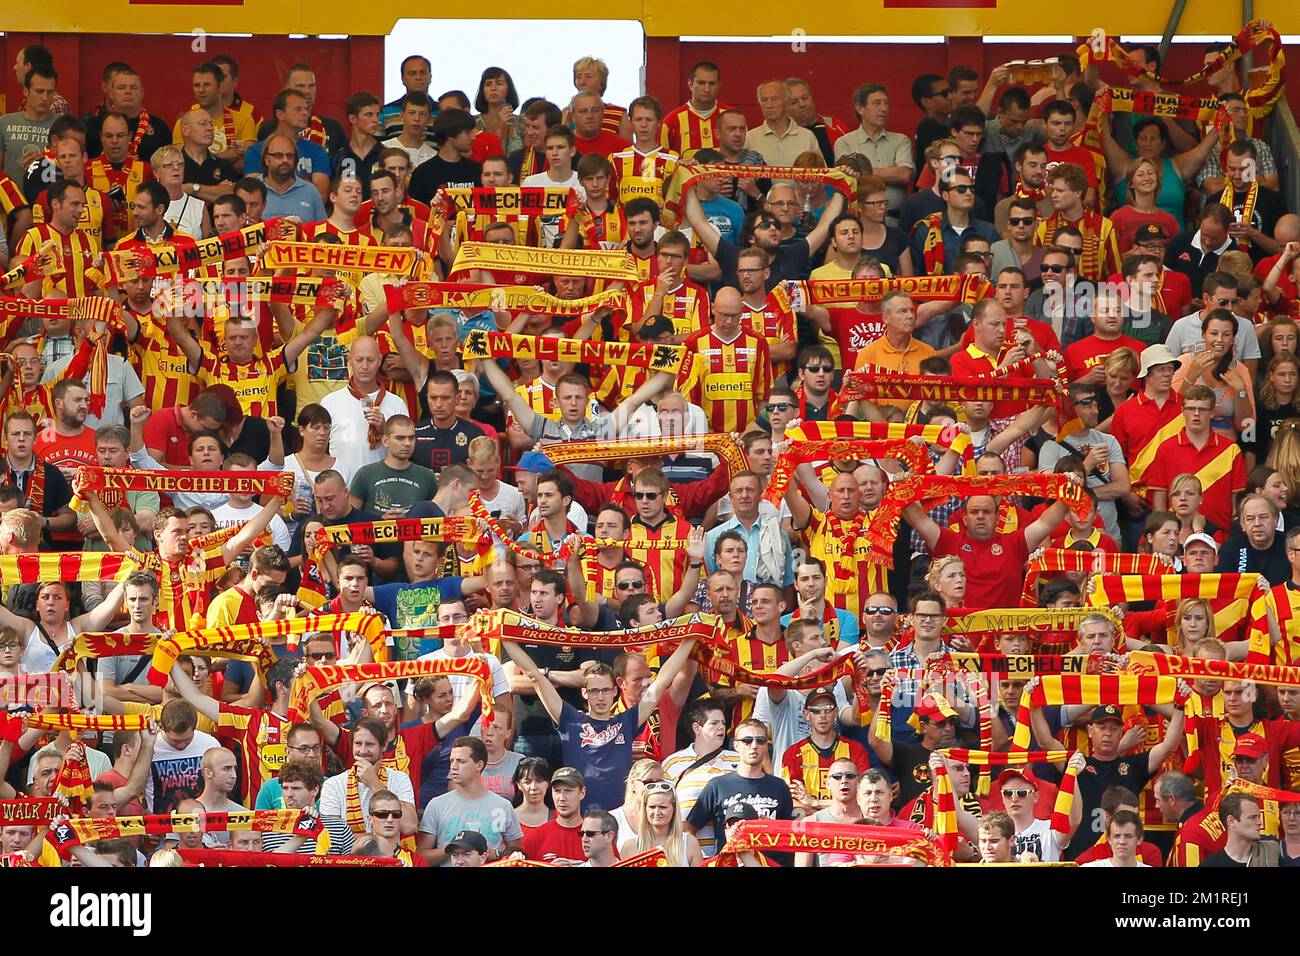 Mechelen's supporters pictured during the Jupiler Pro League match between KV Mechelen and Club Brugge, in Mechelen, Saturday 17 August 2013, on day 04 of the Belgian soccer championship.  Stock Photo